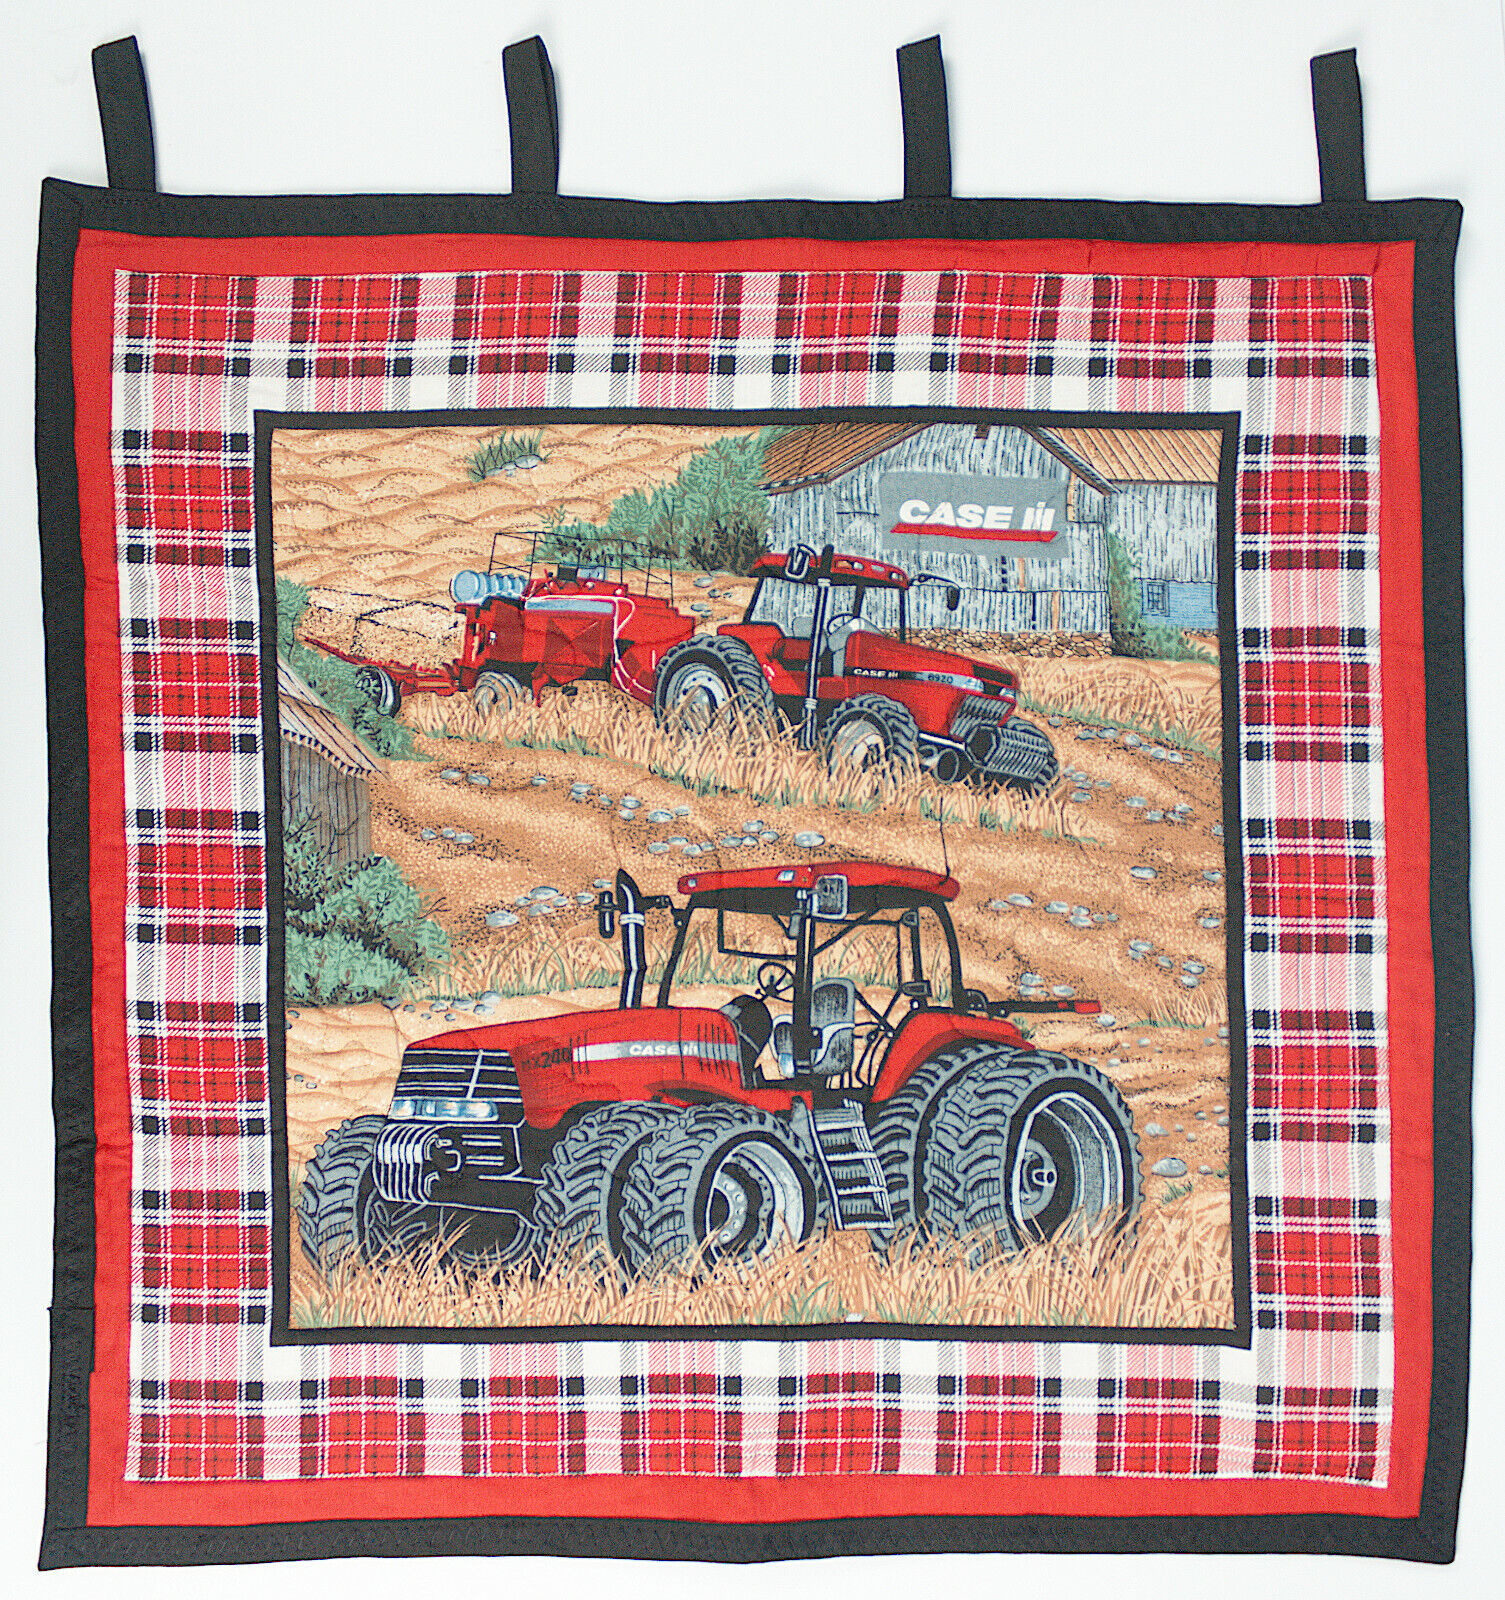 Handmade Wall Hanging Wall Quilt Farm Tractor Hay Baler Kids Nos New Case Ih